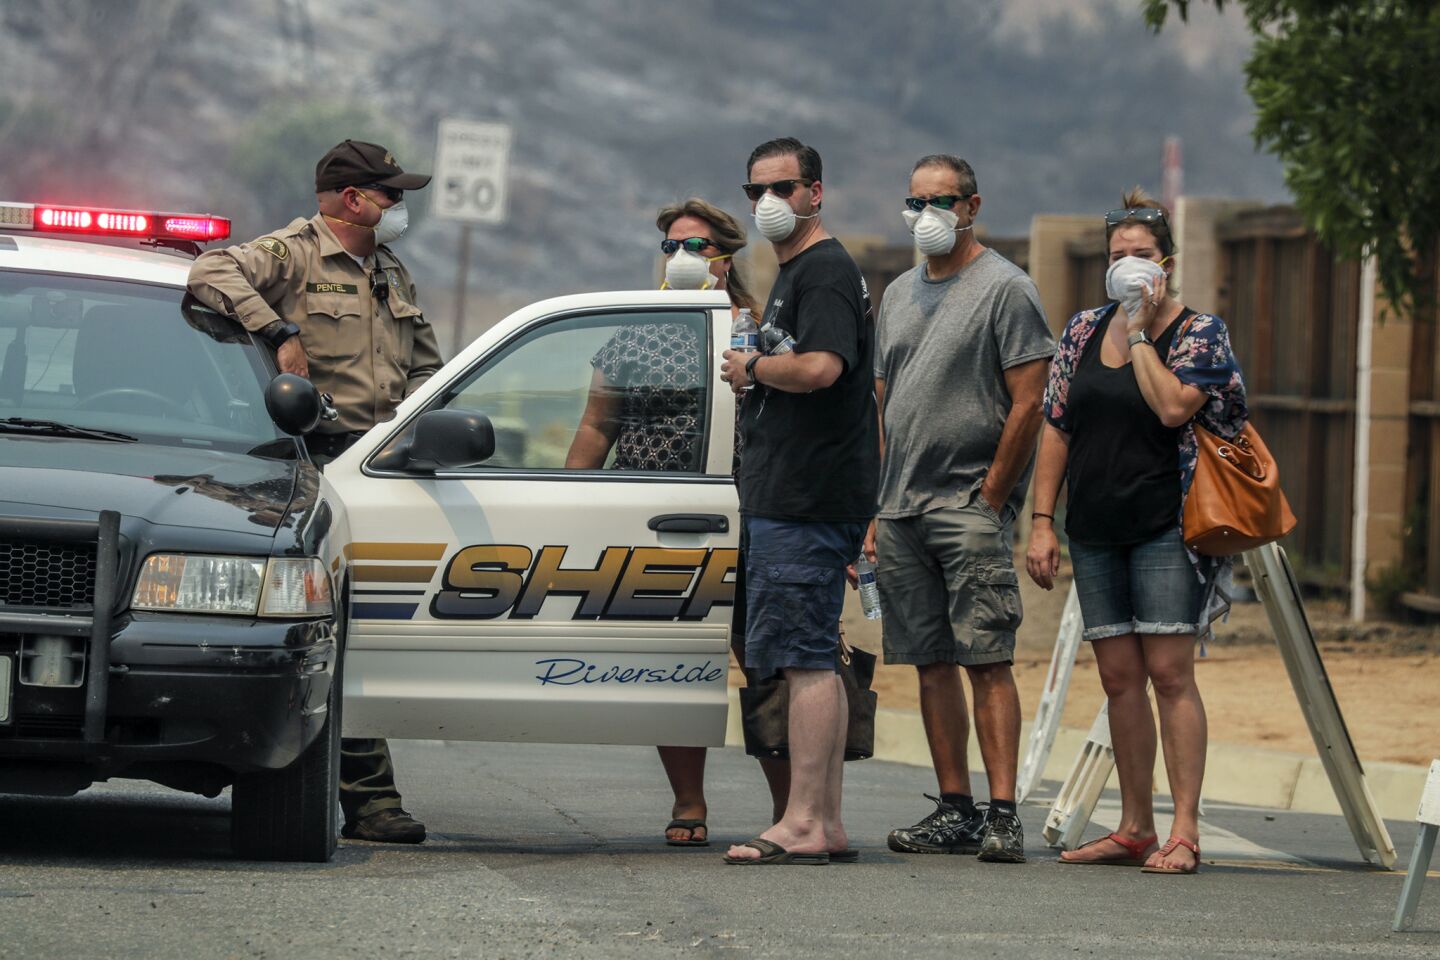 Residents and law enforcement wear breathing mask to avoid the thick smoke created by Holy Fire in Lake Elsinore.